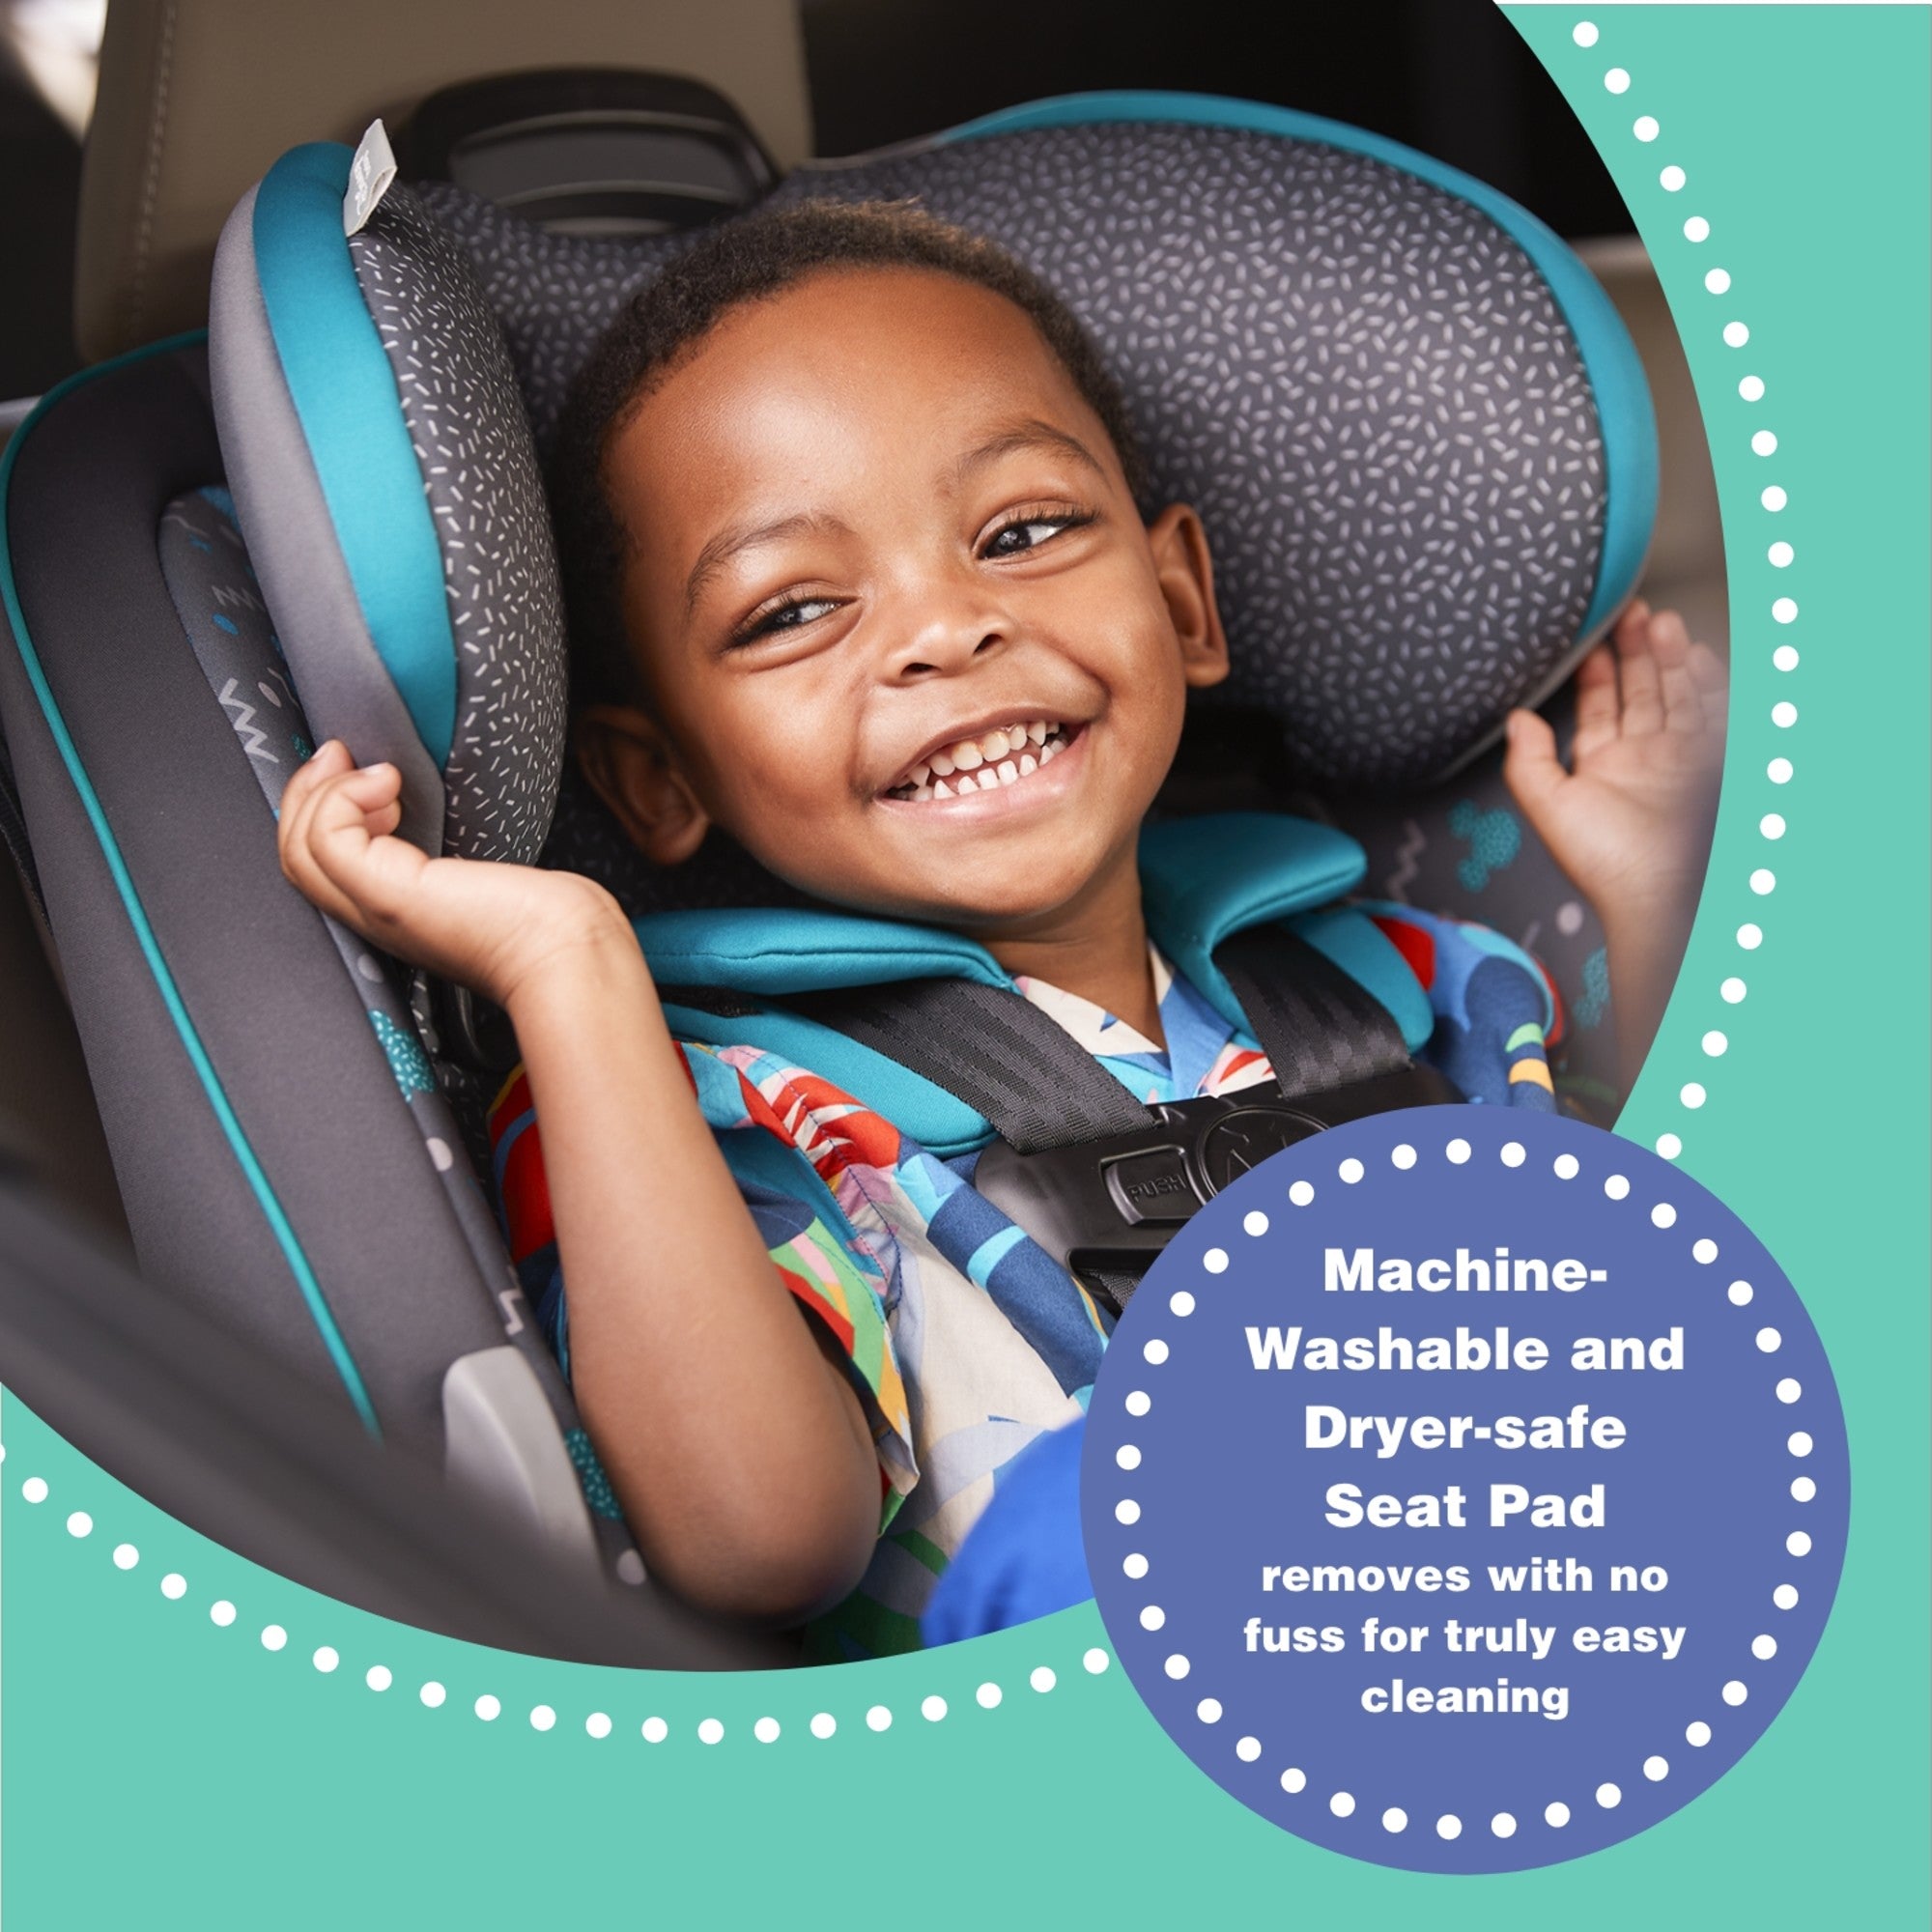 Disney Baby Grow and Go™ All-in-One Convertible Car Seat - Machine-washable and dryer-safe seat pad removes with no fuss for truly easy cleaning